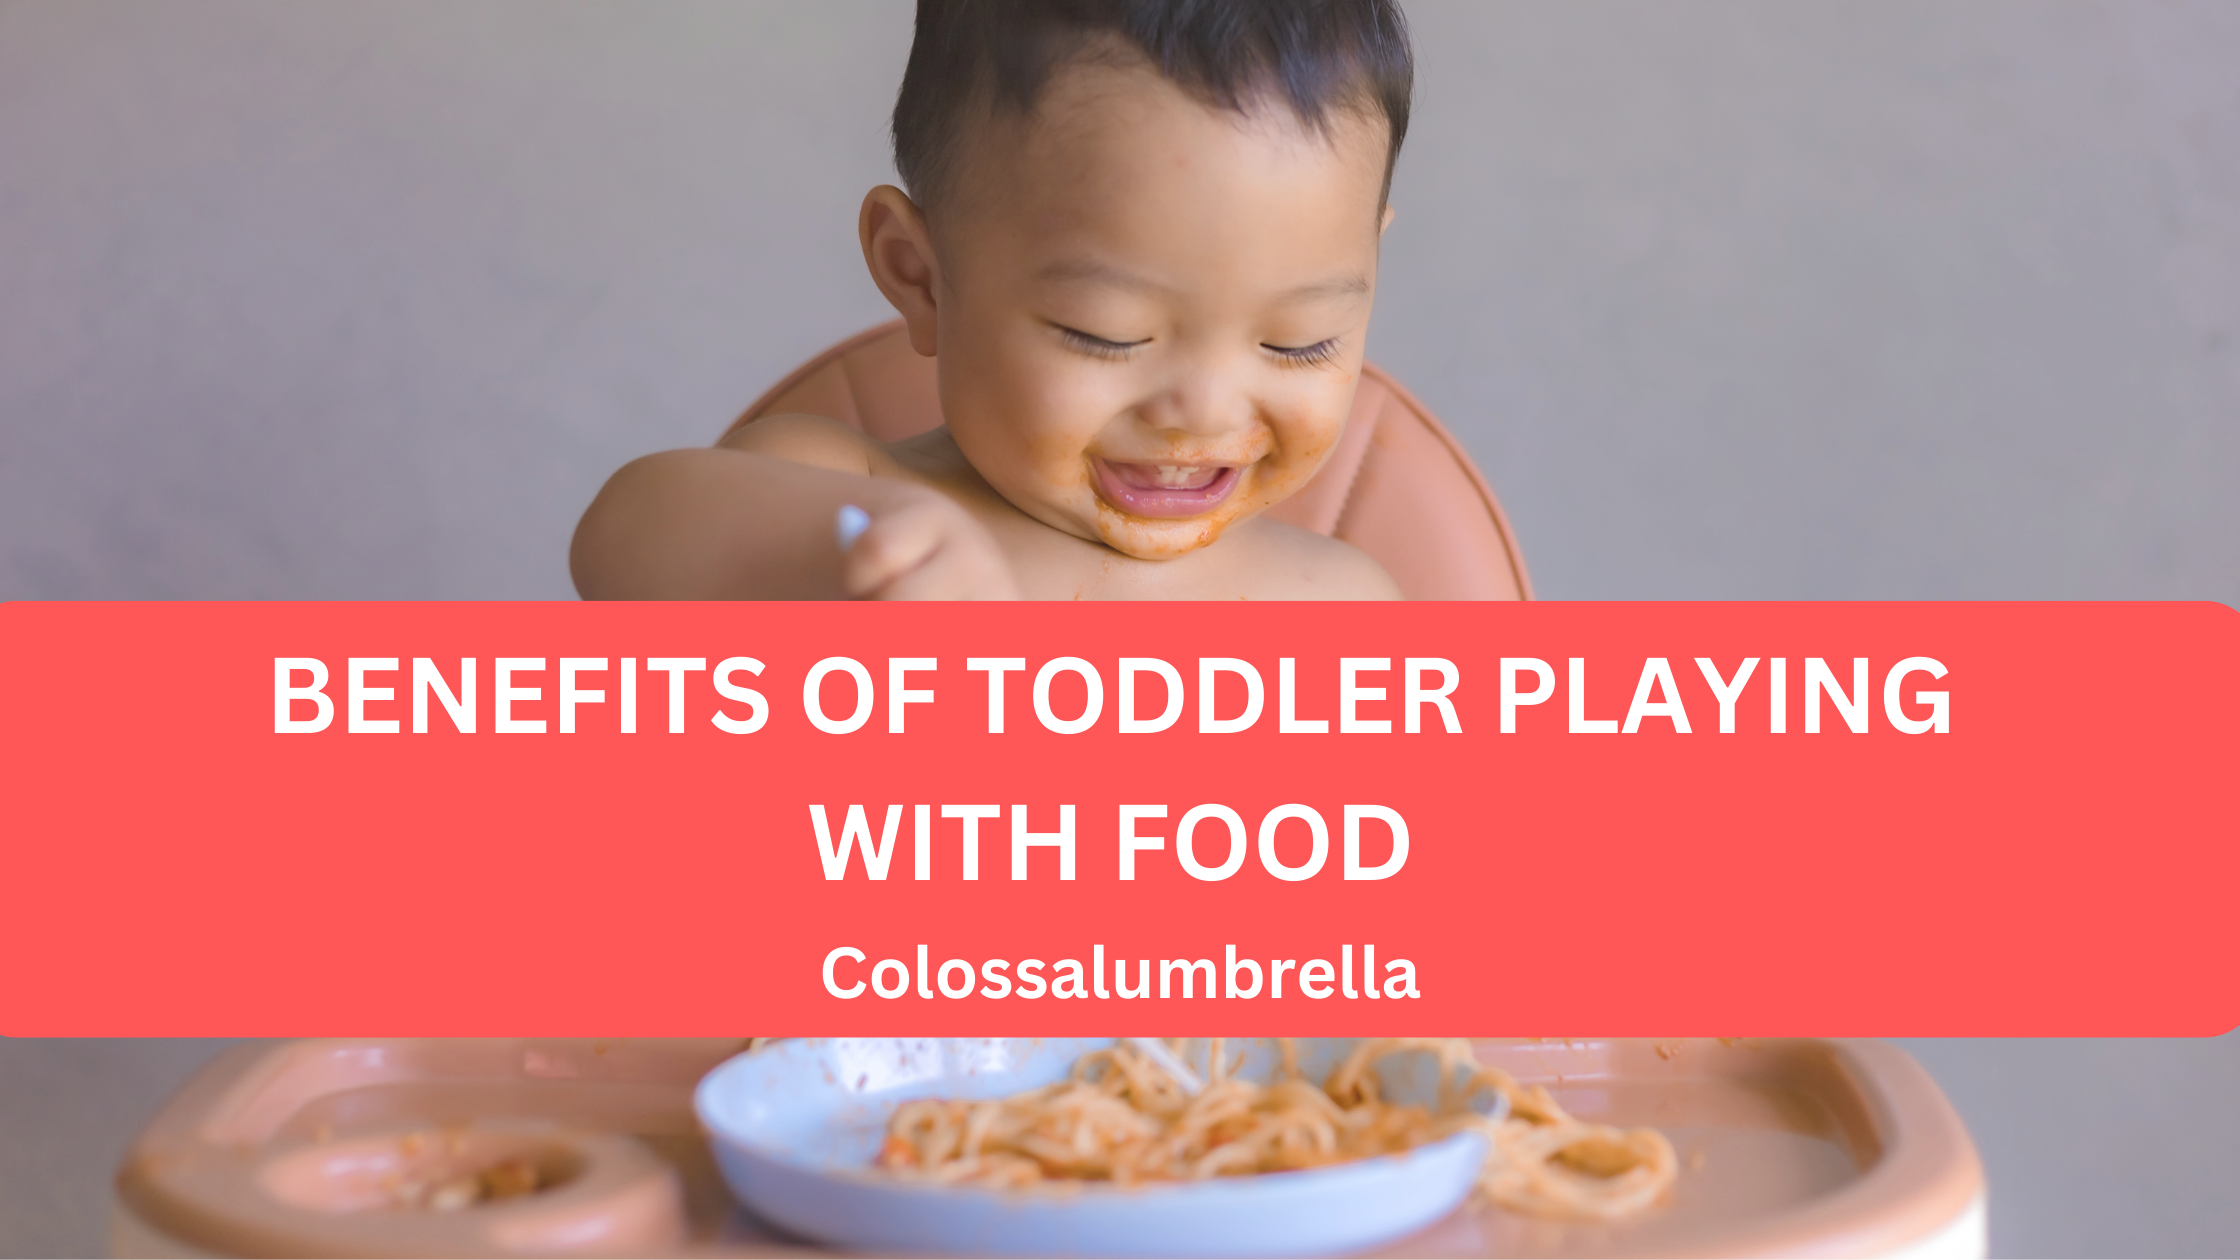 Benefits of Toddler playing with food